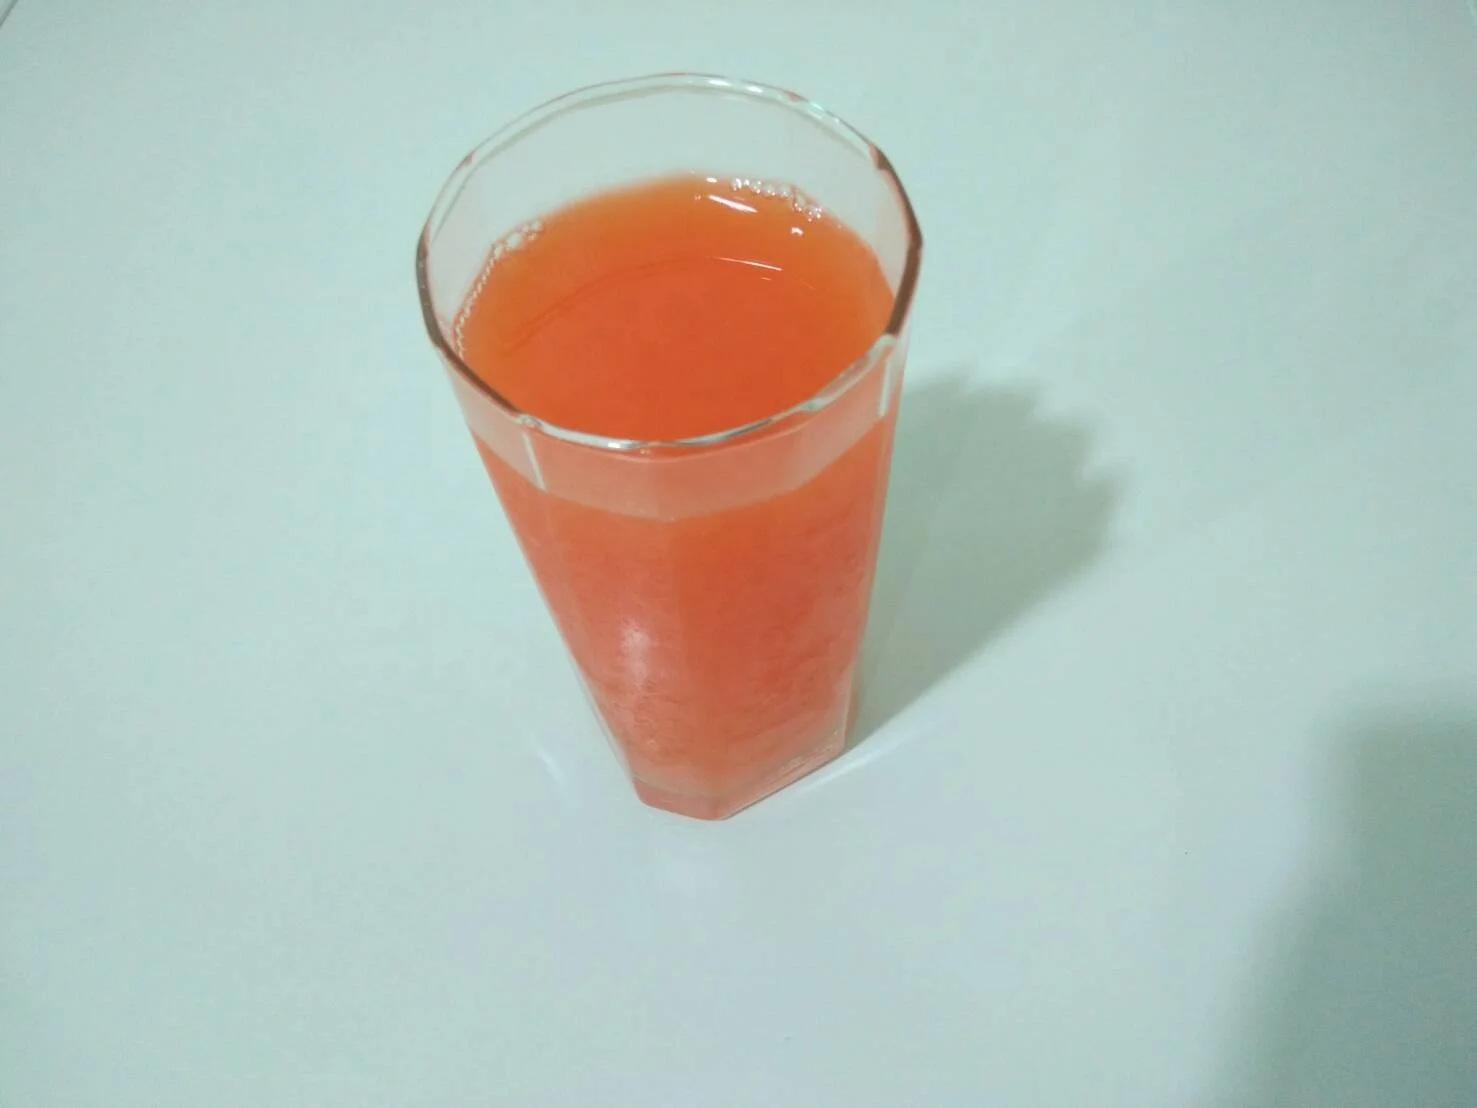 High Quality Refreshing and Concentrated Instant Mixed Fruit Juice Powder Drink from Thailand with 15 Kg per Carton